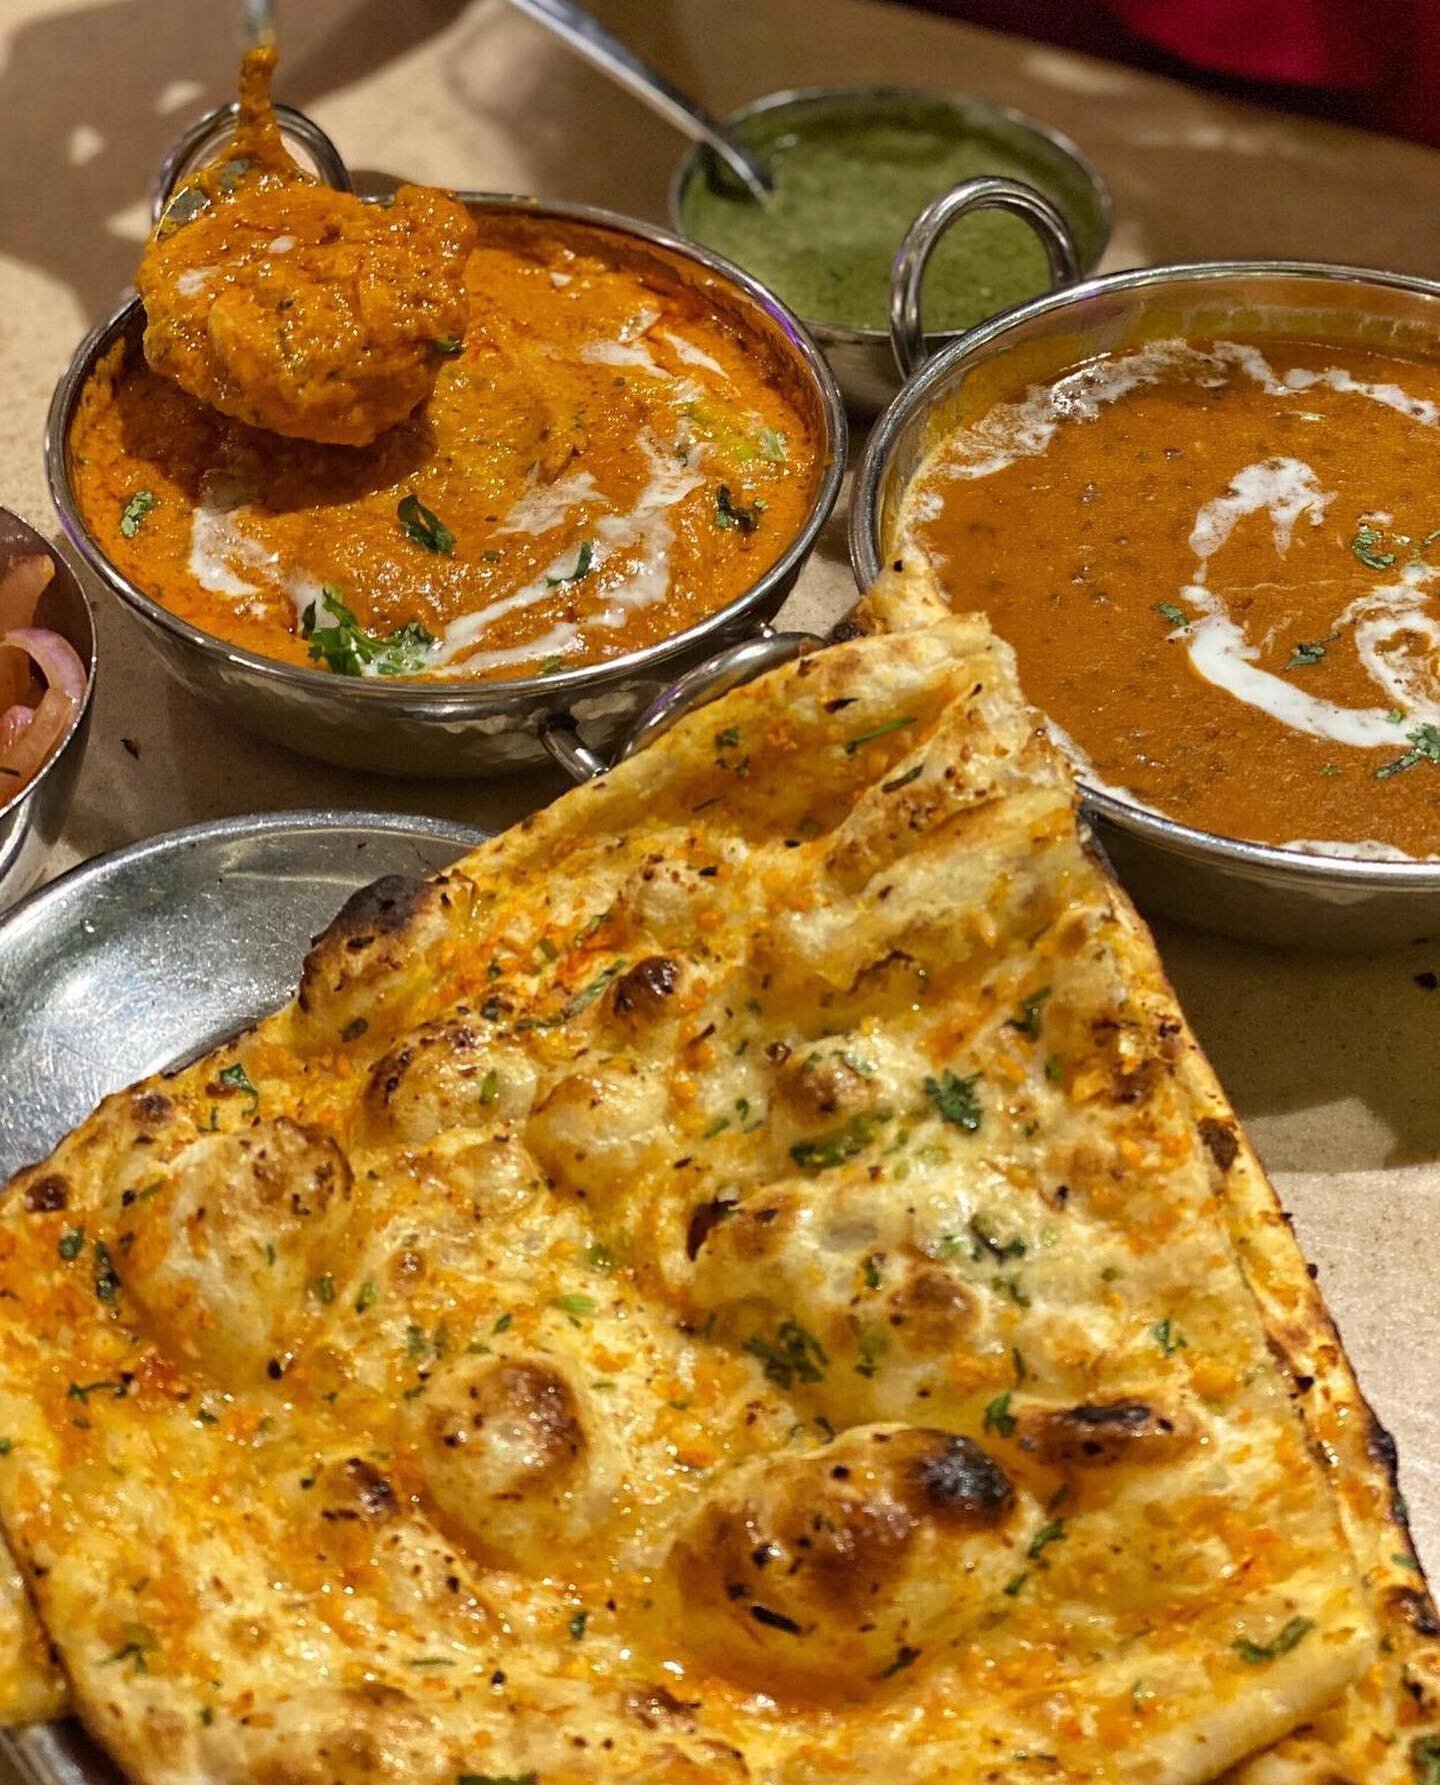 Which Asian food are you feeling for dinner tonight? Whichever one you pick will be your next destination abroad! 😃 
1. Butter chicken, Dal Makhni &amp; garlic naan - India 🇮🇳 
2. Korean fried chicken - South Korea 🇰🇷 
3. Sushi - Japan 🇯🇵 
4. 